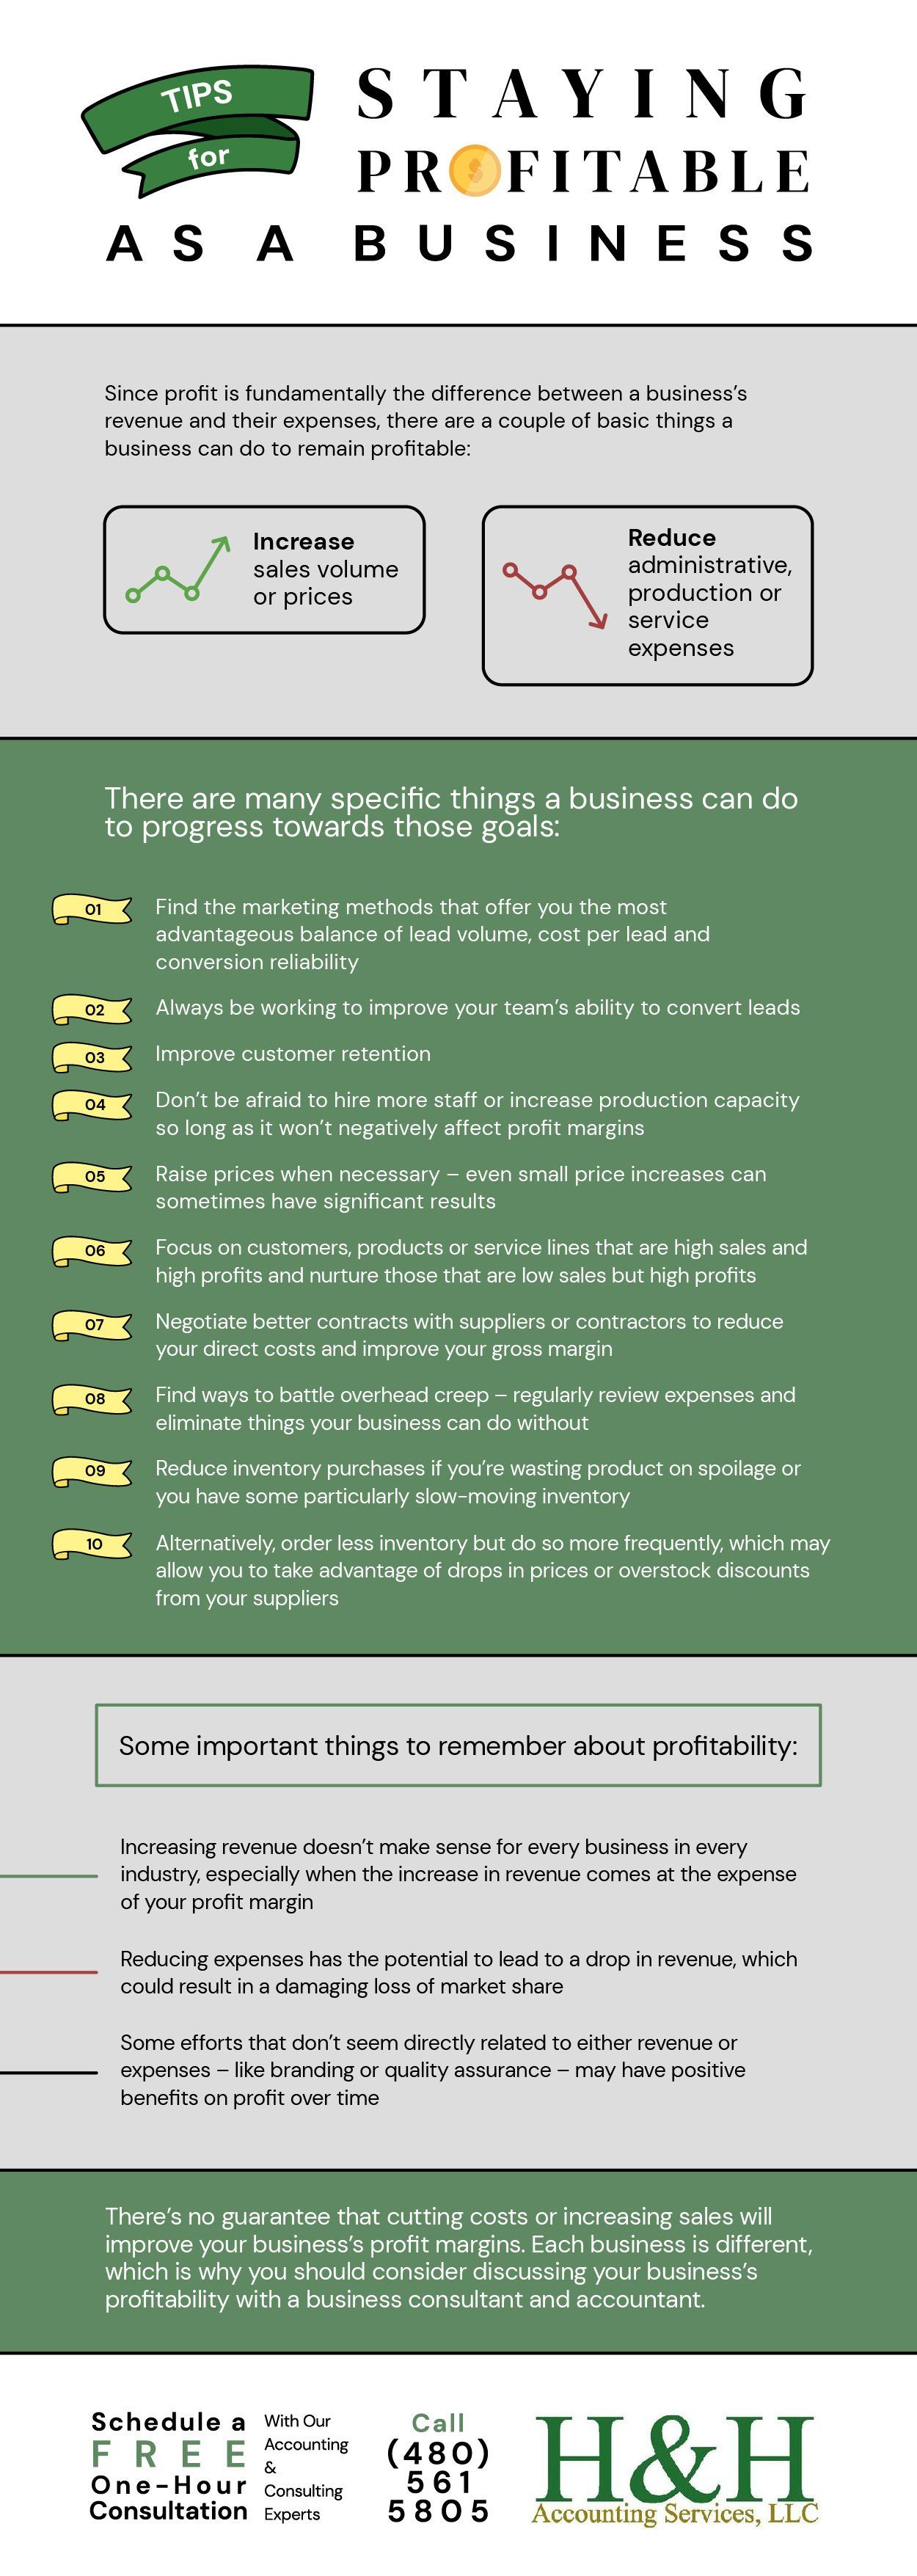 tips for staying profitable as a business infographic